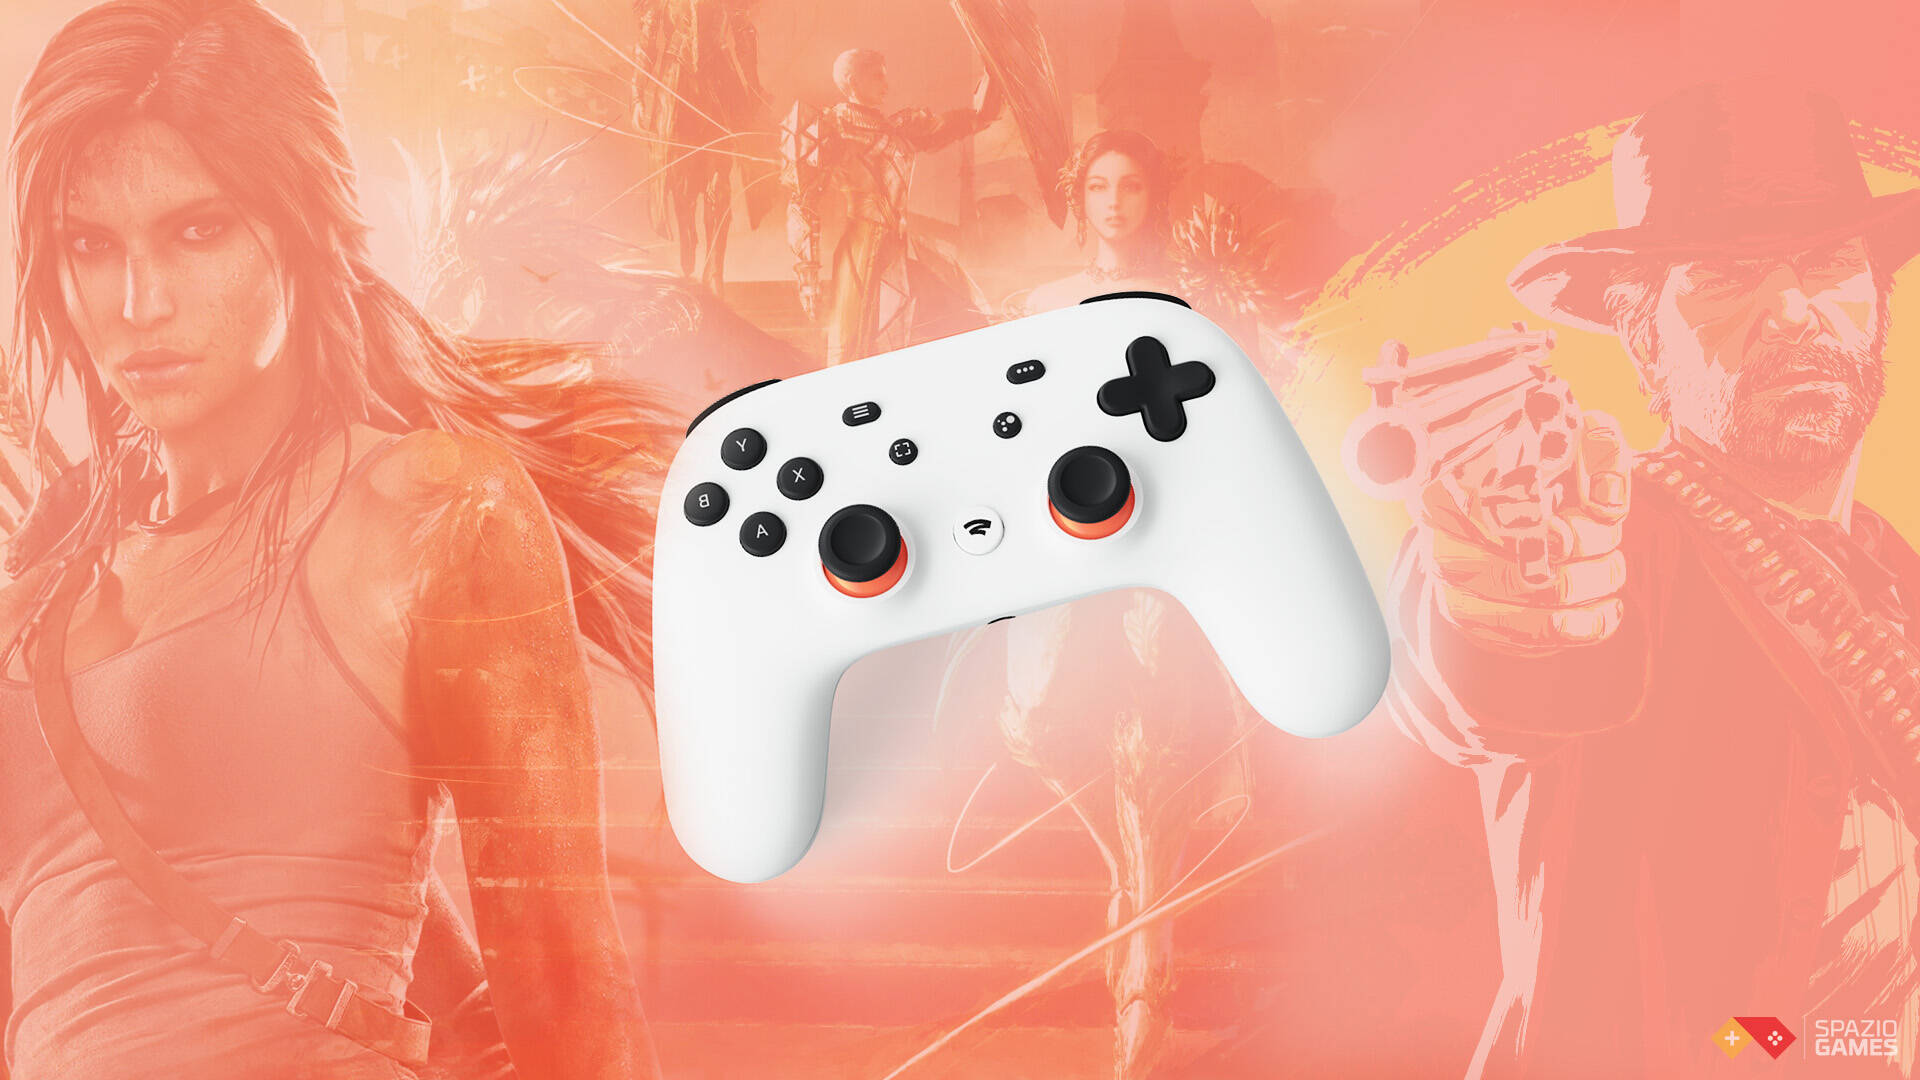 Stadia, someone is looking to use their controller with other platforms